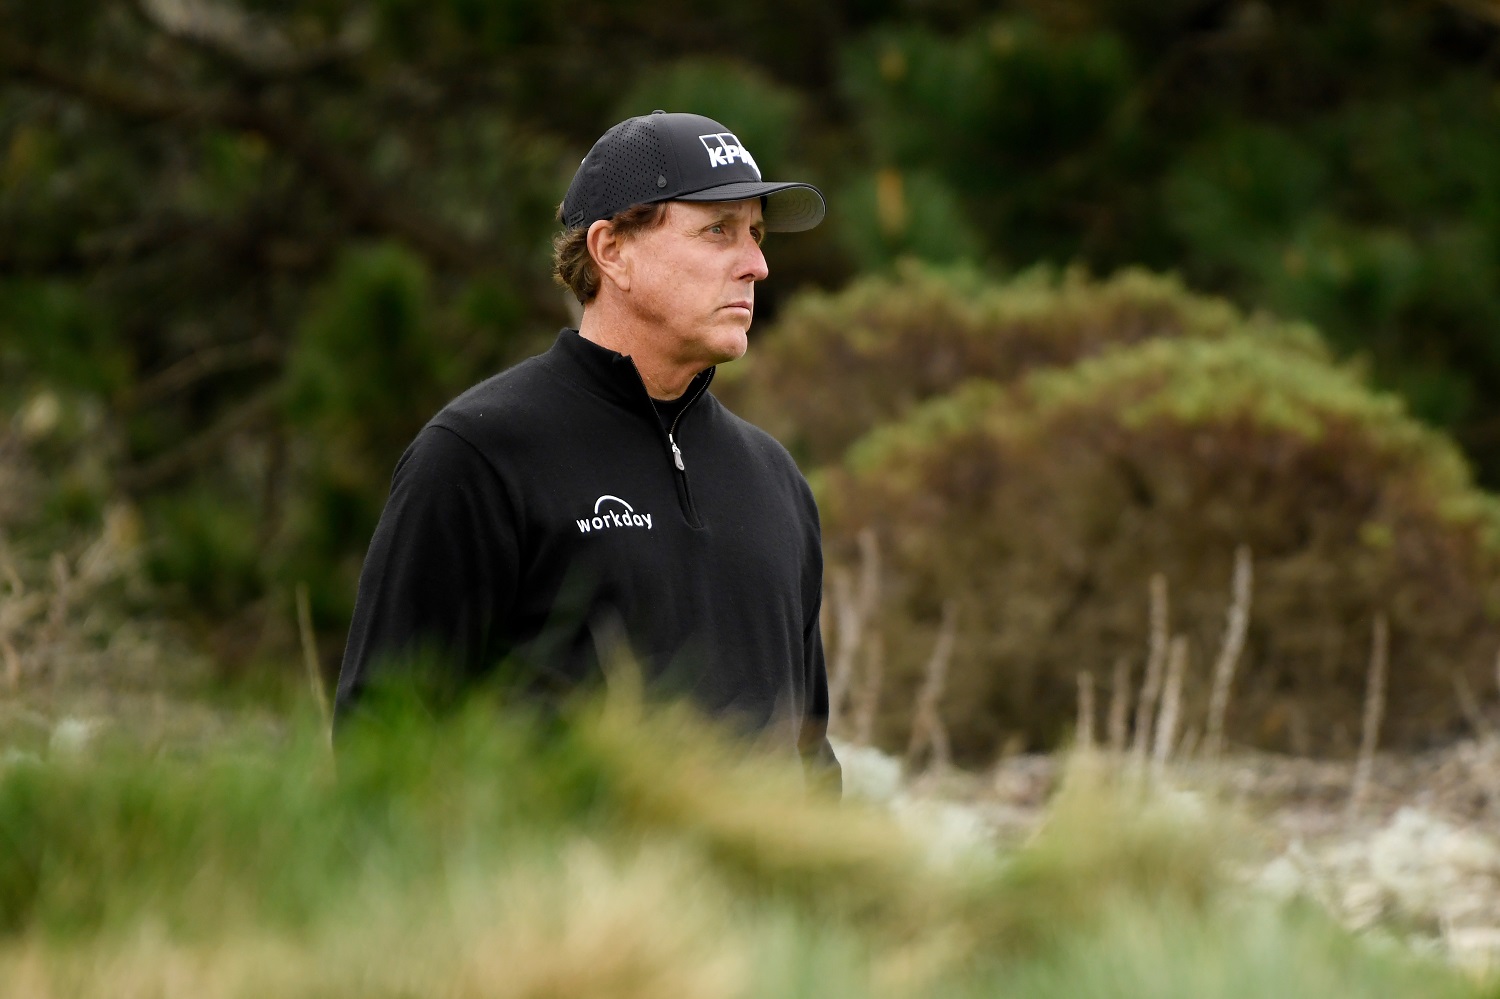 Michael Jordan Was a Controversial Entrant in a Prestigious Amateur Golf  Event and Was Lit up by 21-Year-Old Phil Mickelson, Who Specifically Asked  to Be Grouped With His Airness 